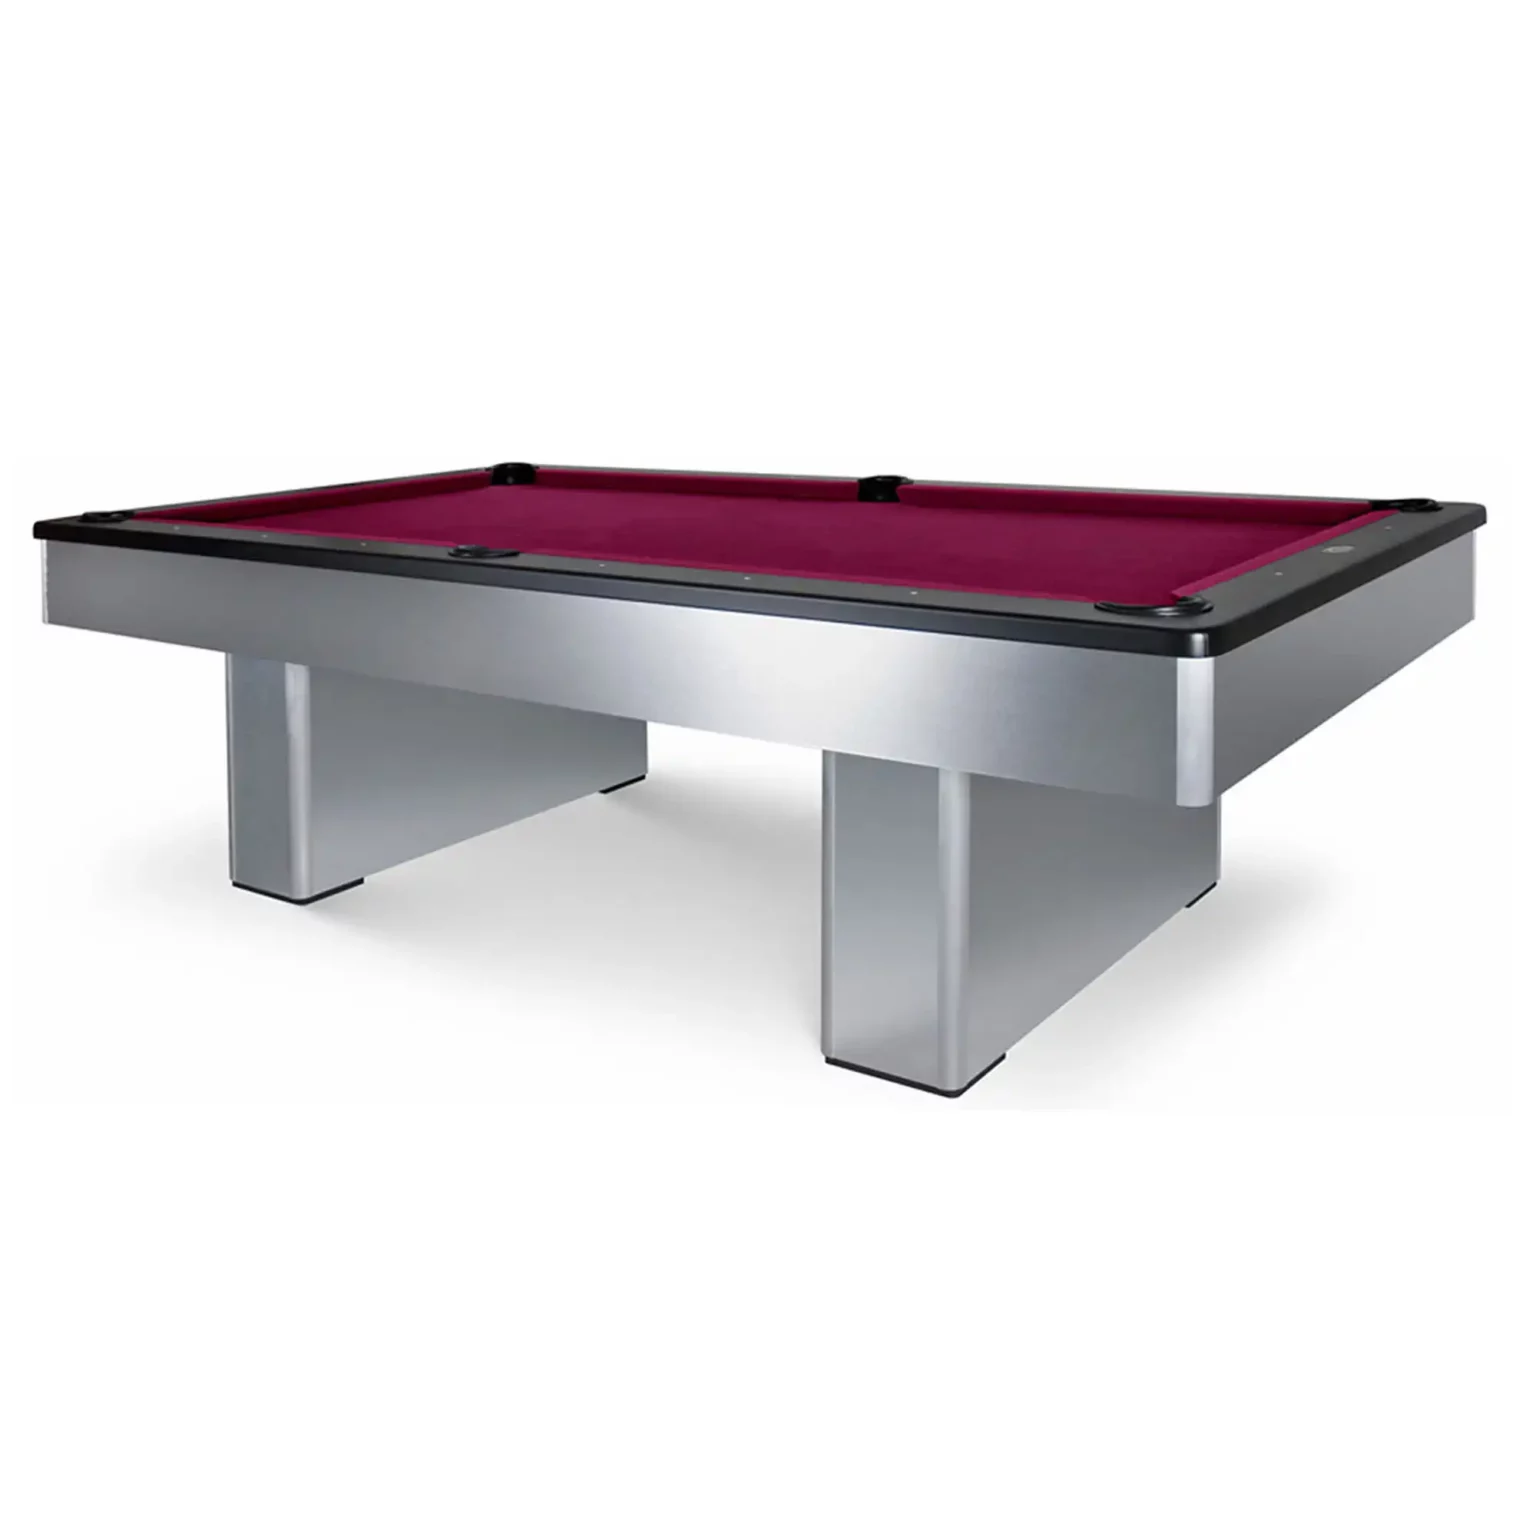 Olhausen Monarch pool table